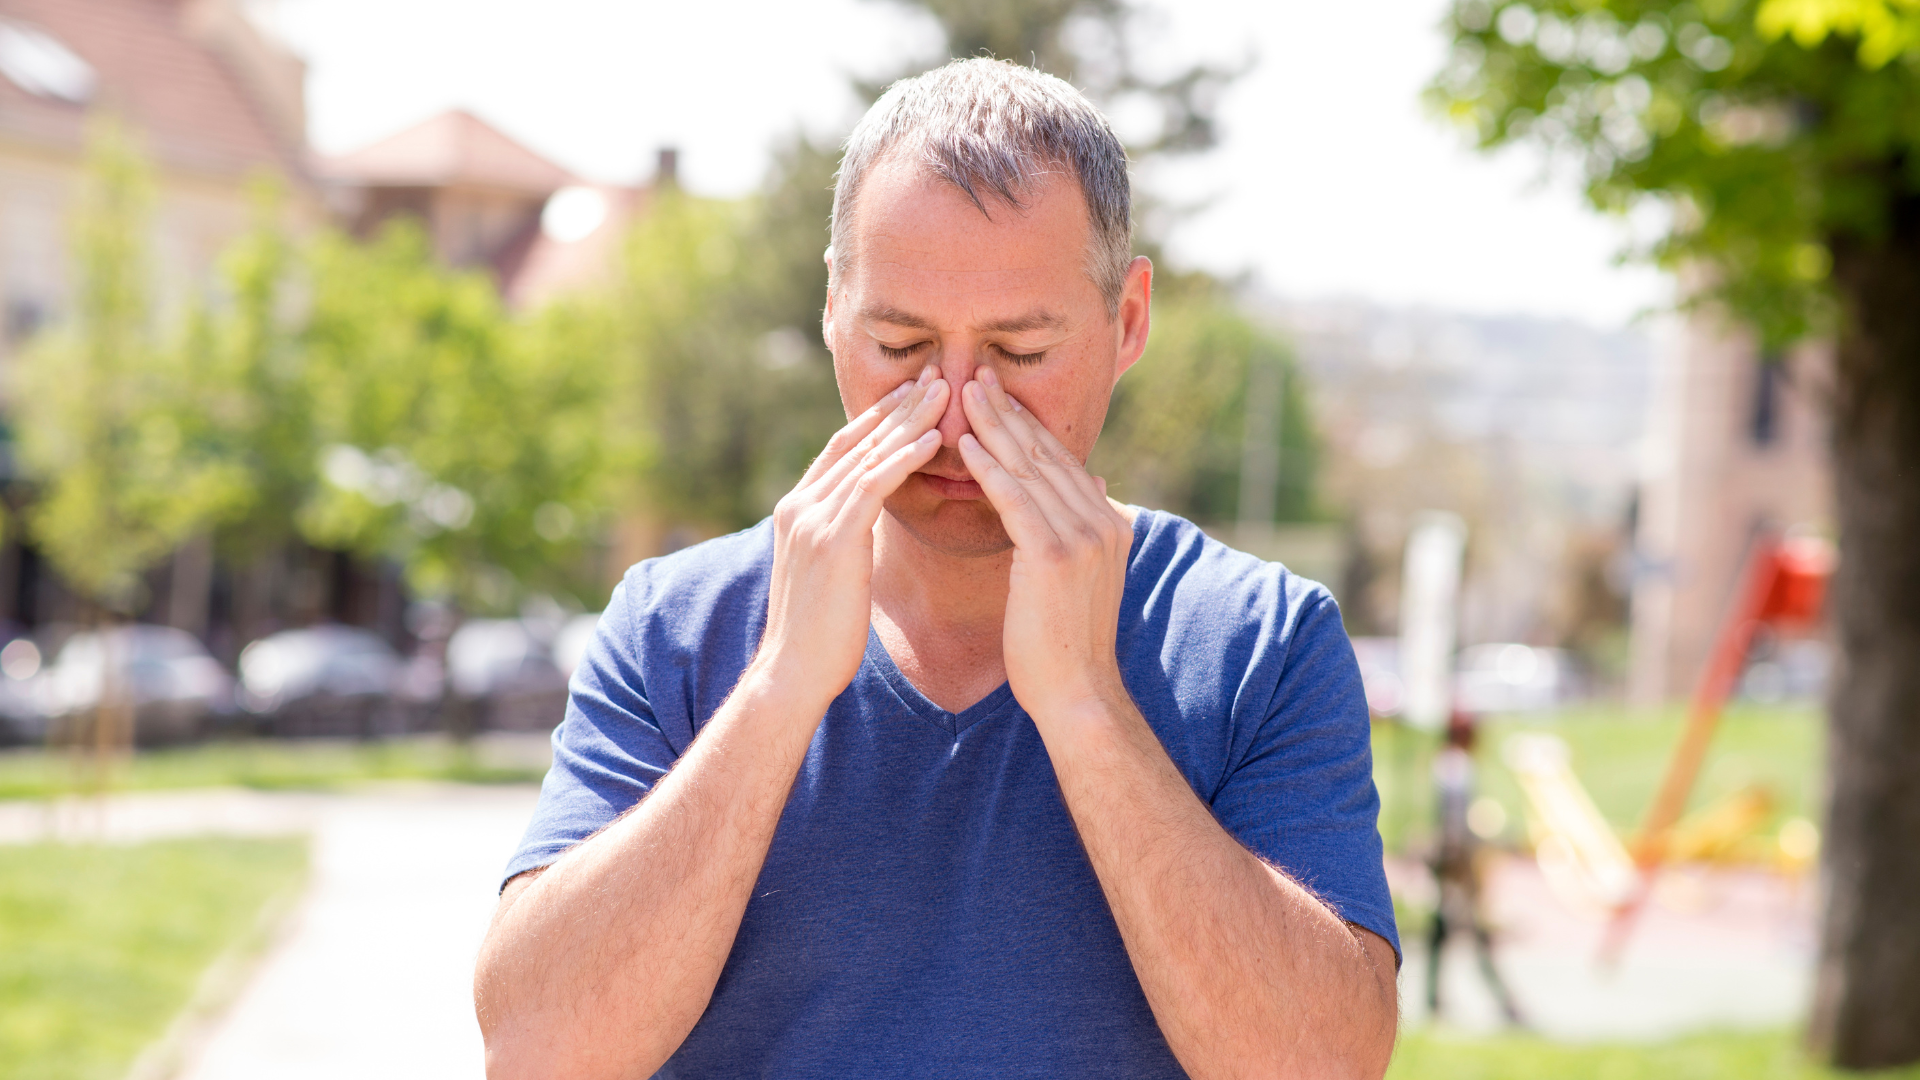 How Is Chronic Sinusitis Diagnosed?